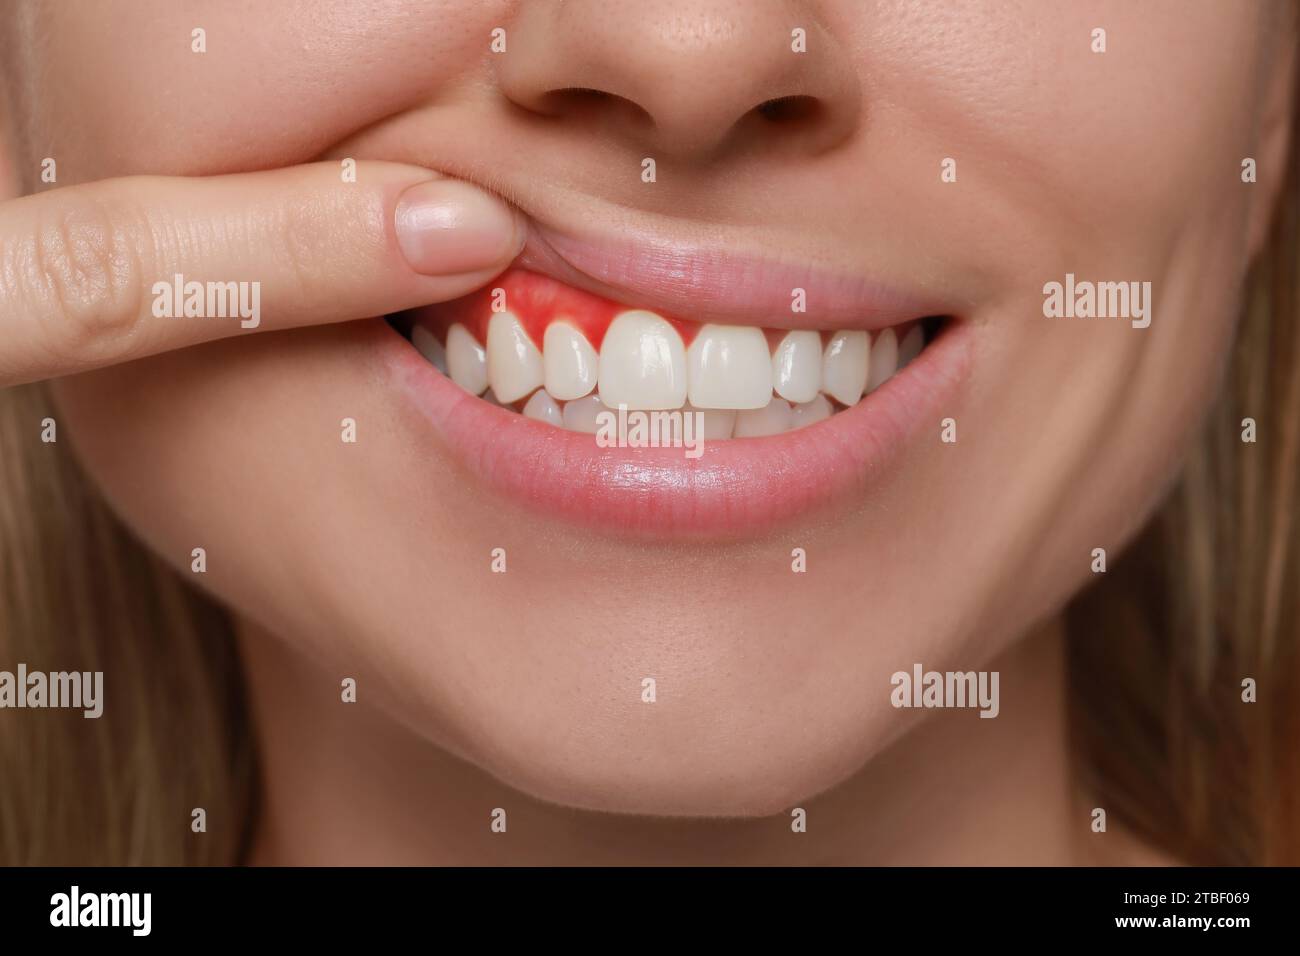 Woman showing inflamed gum, closeup. Oral cavity health Stock Photo